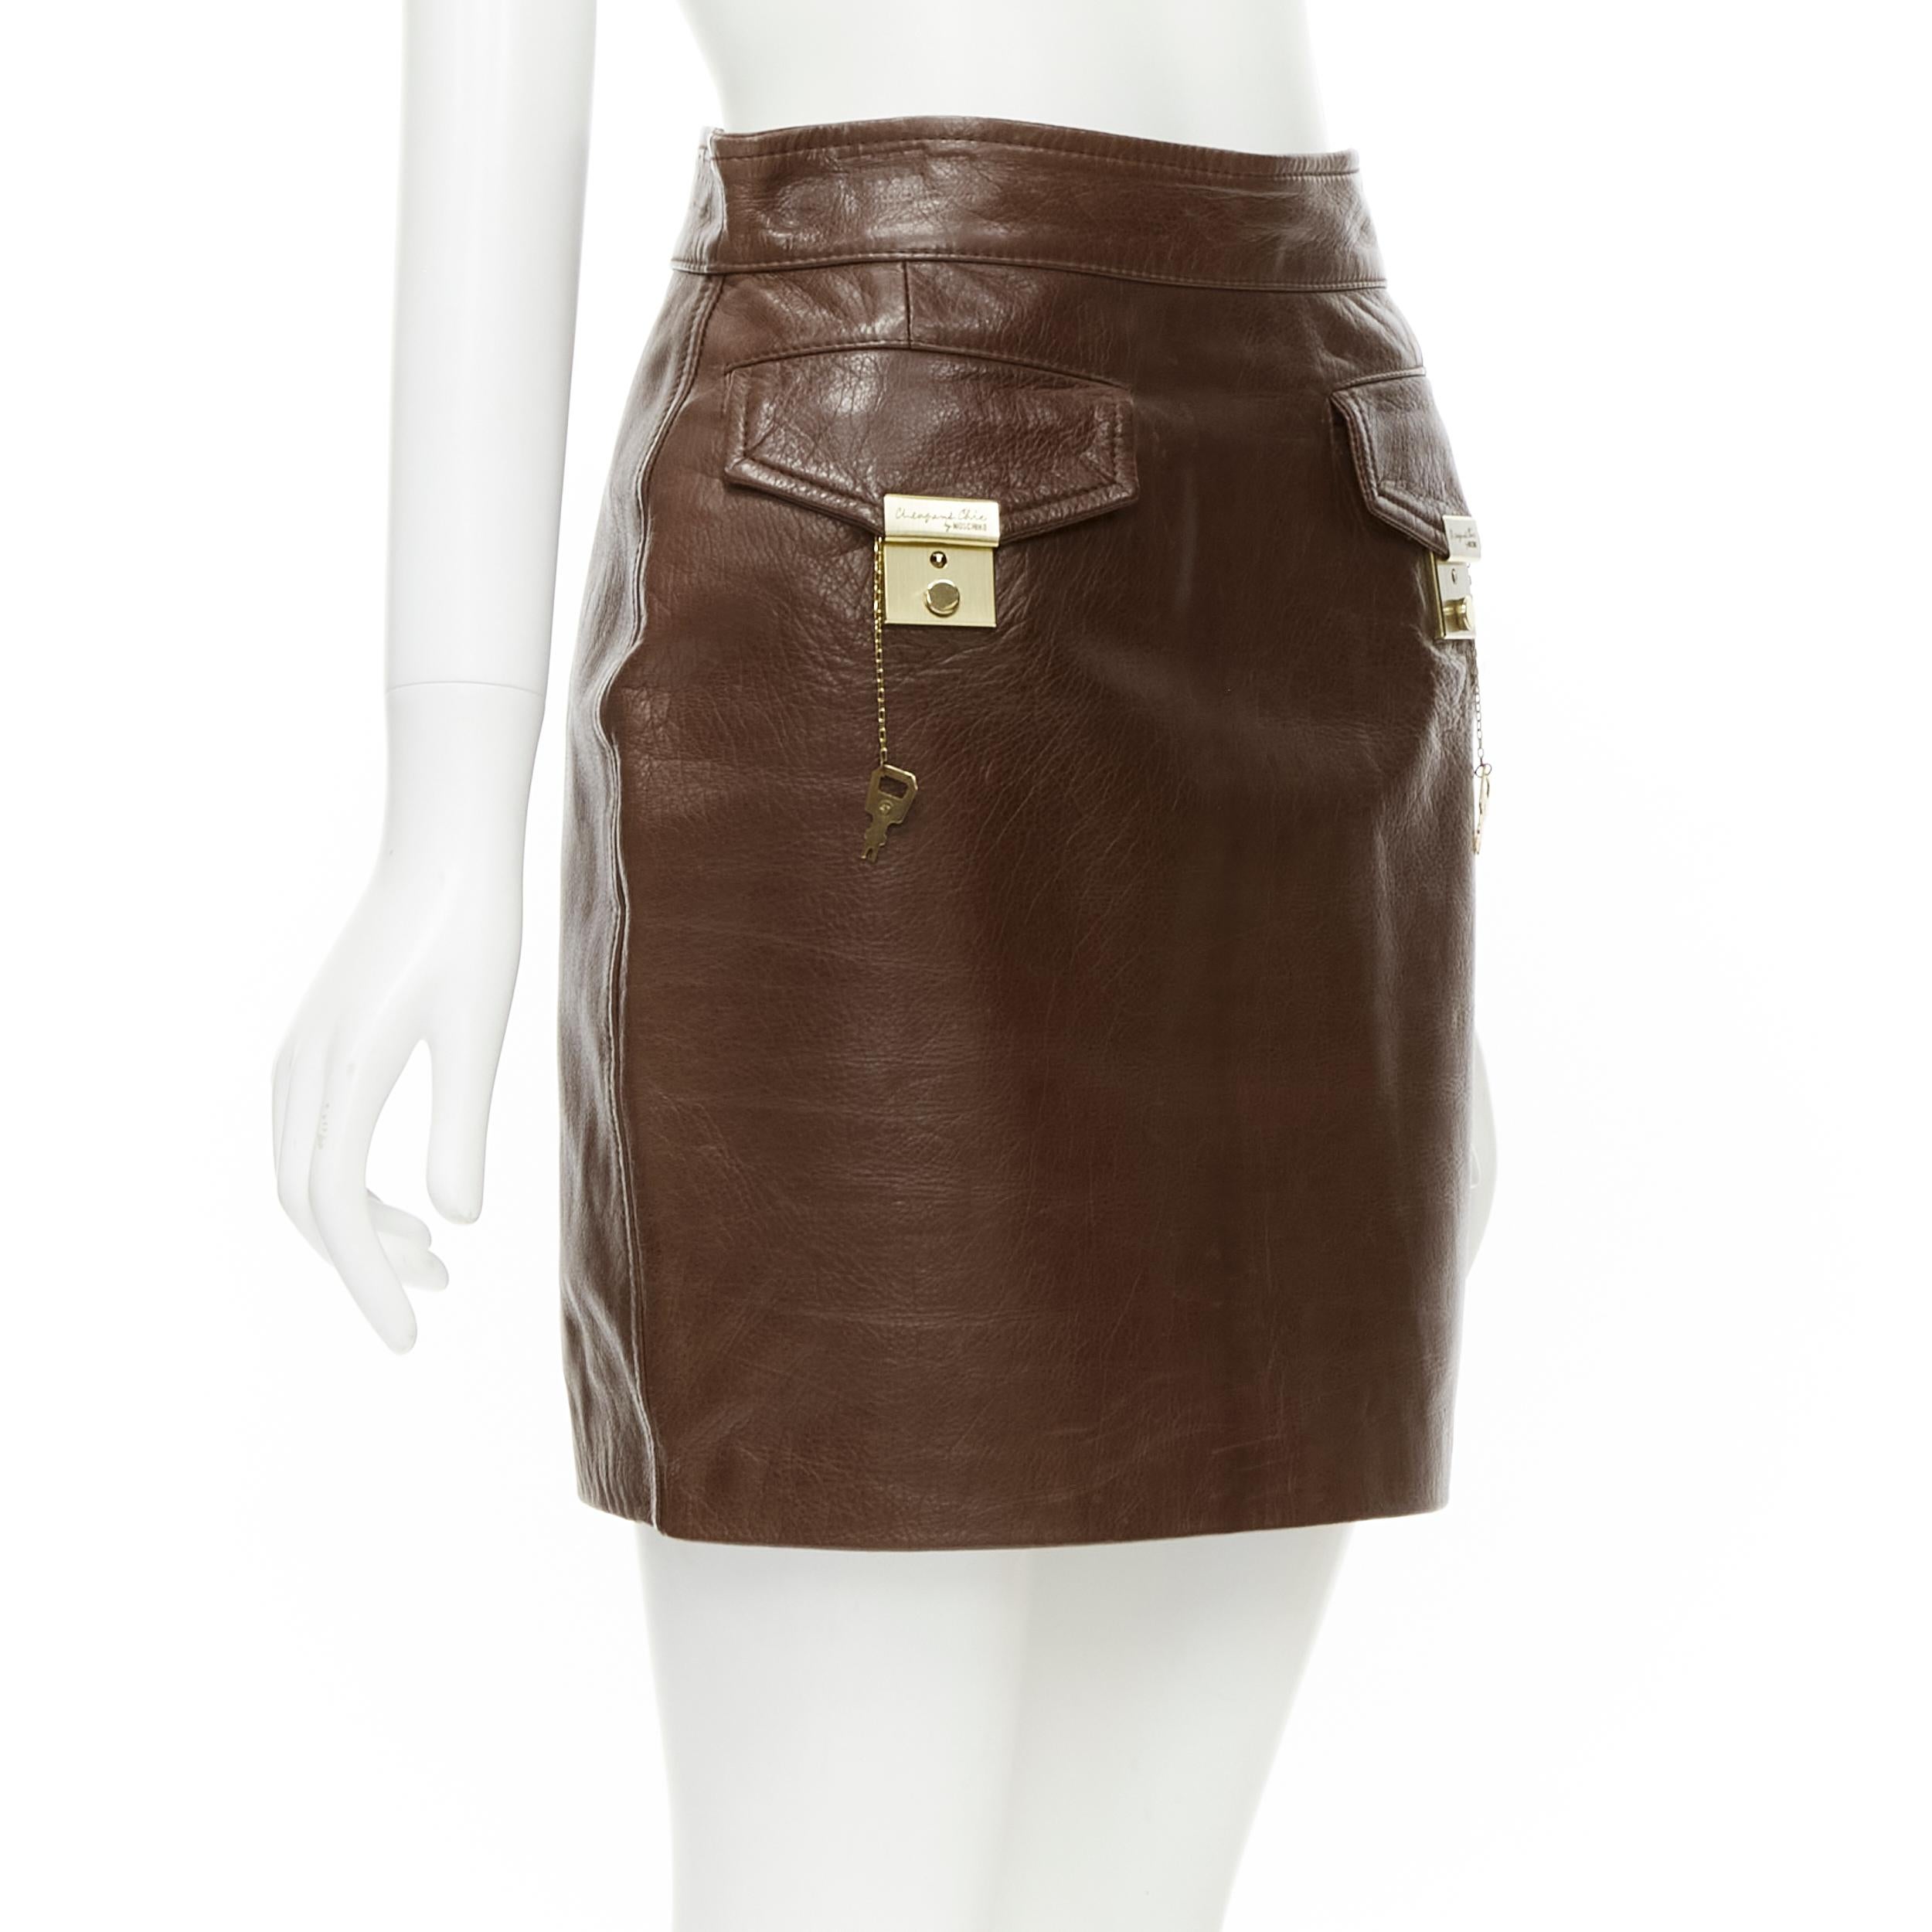 MOSCHINO Cheap Chic brown gold leather key lock flap pocket skirt S 
Reference: JECN/A00014 
Brand: Moschino 
Material: Leather 
Color: Brown 
Pattern: Solid 
Closure: Zip 
Extra Detail: Gold-tone lock design on flap pocket. Button zip back closure.